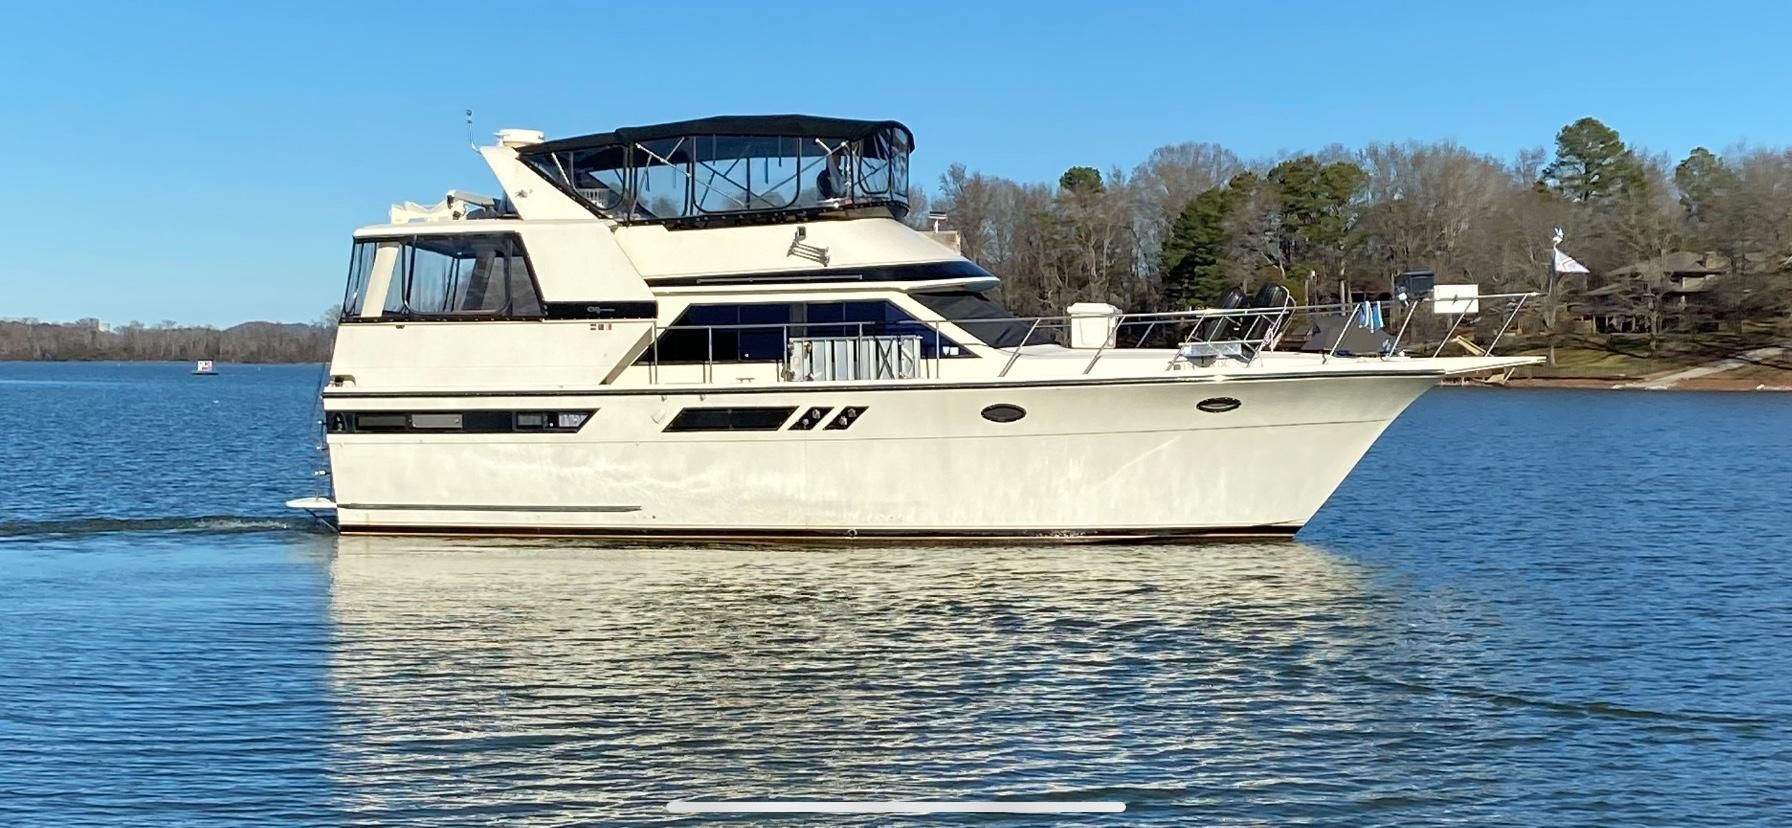 45 ft motor yachts for sale